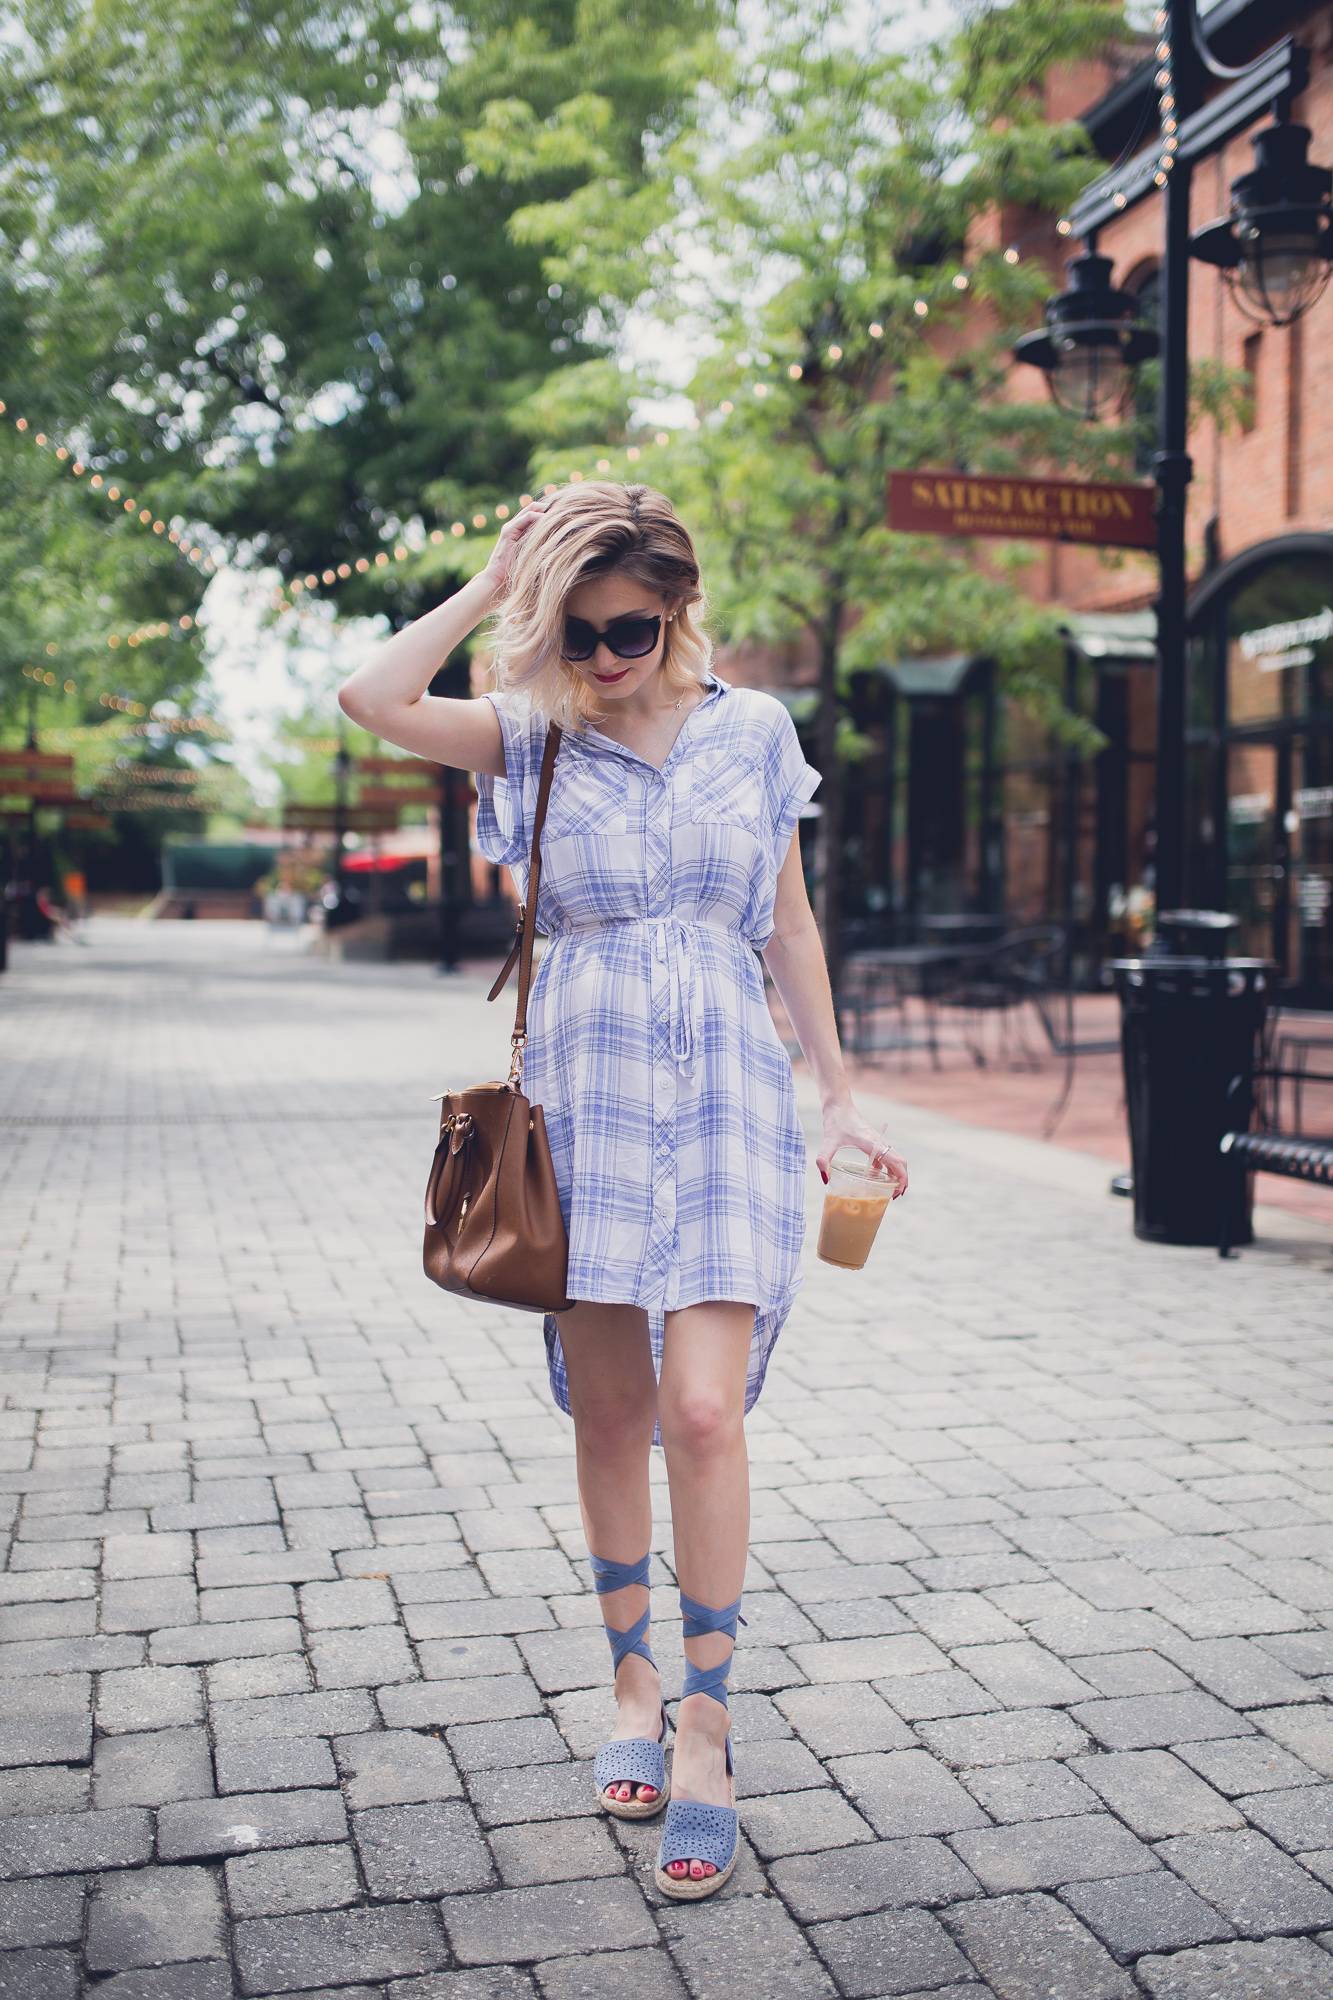 Fashion, lifestyle, and beauty blogger/ vlogger Jessica Linn on Linn Style wearing a blue and white plaid button up t-shirt dress from Ross, lace up blue sandals from Report footwear, and jewelry from local Cary North Carolina business CY Design Studio and lipstick from locally made all natural organic lipstick from SumerReign Cosmetics by Ashley Summerville in Durham NC.